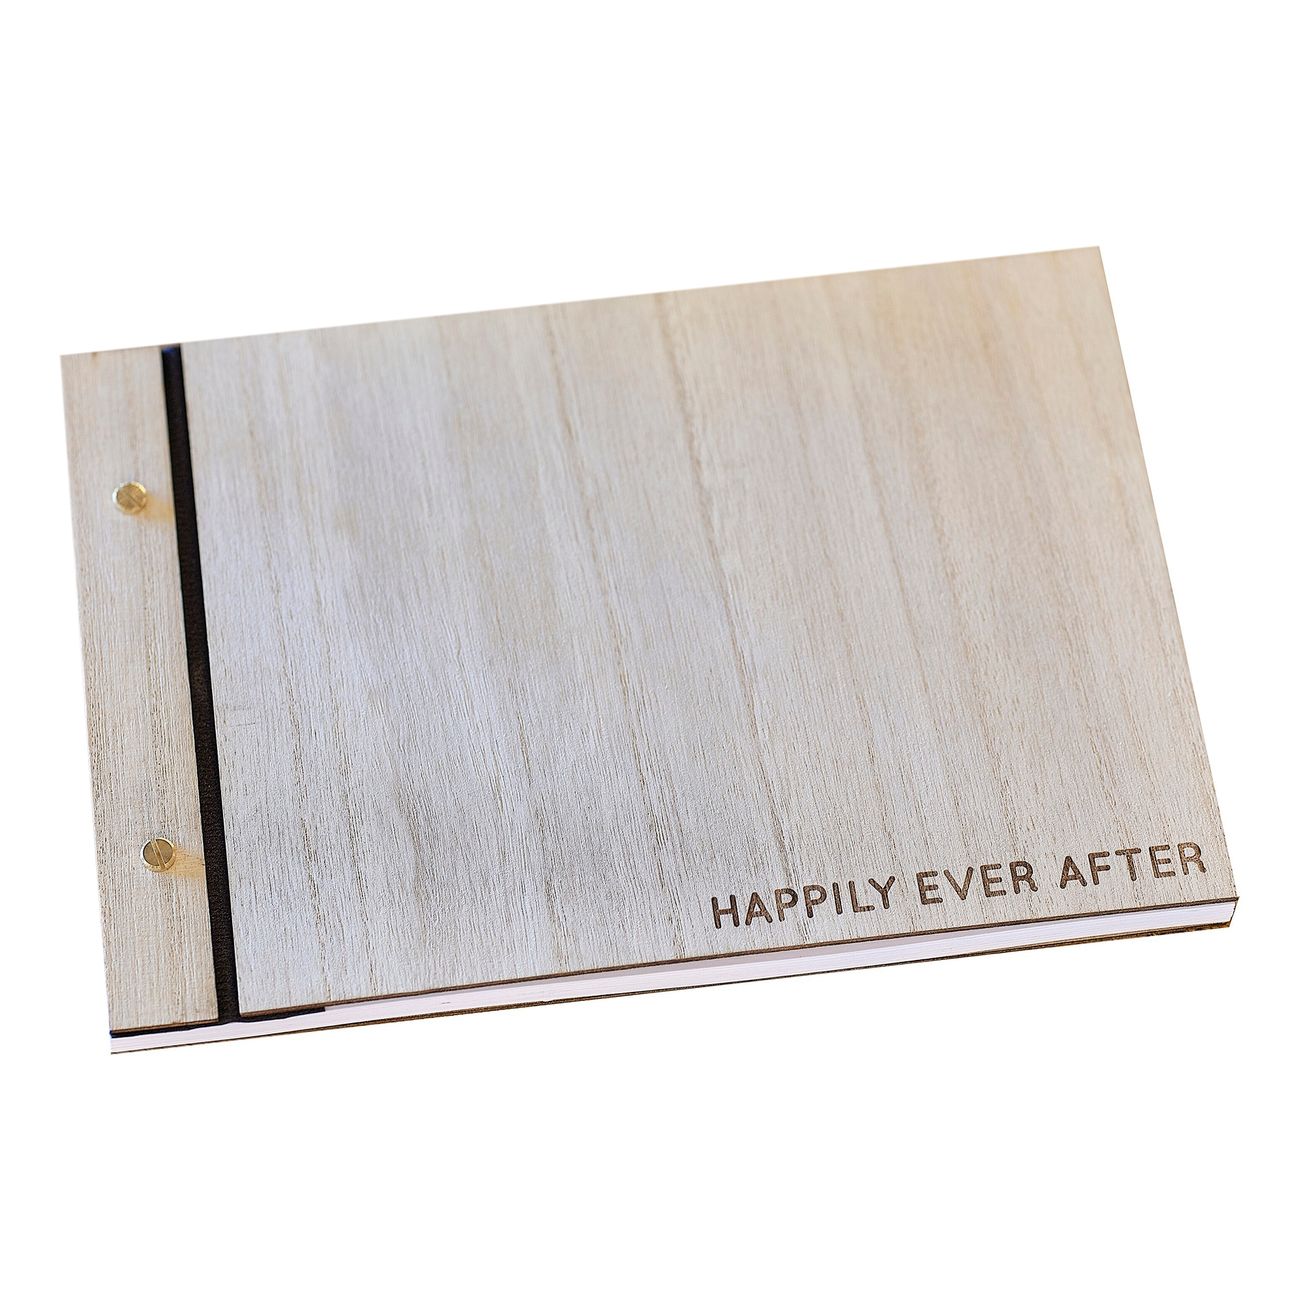 gastbok-i-tra-happily-ever-after-101792-1